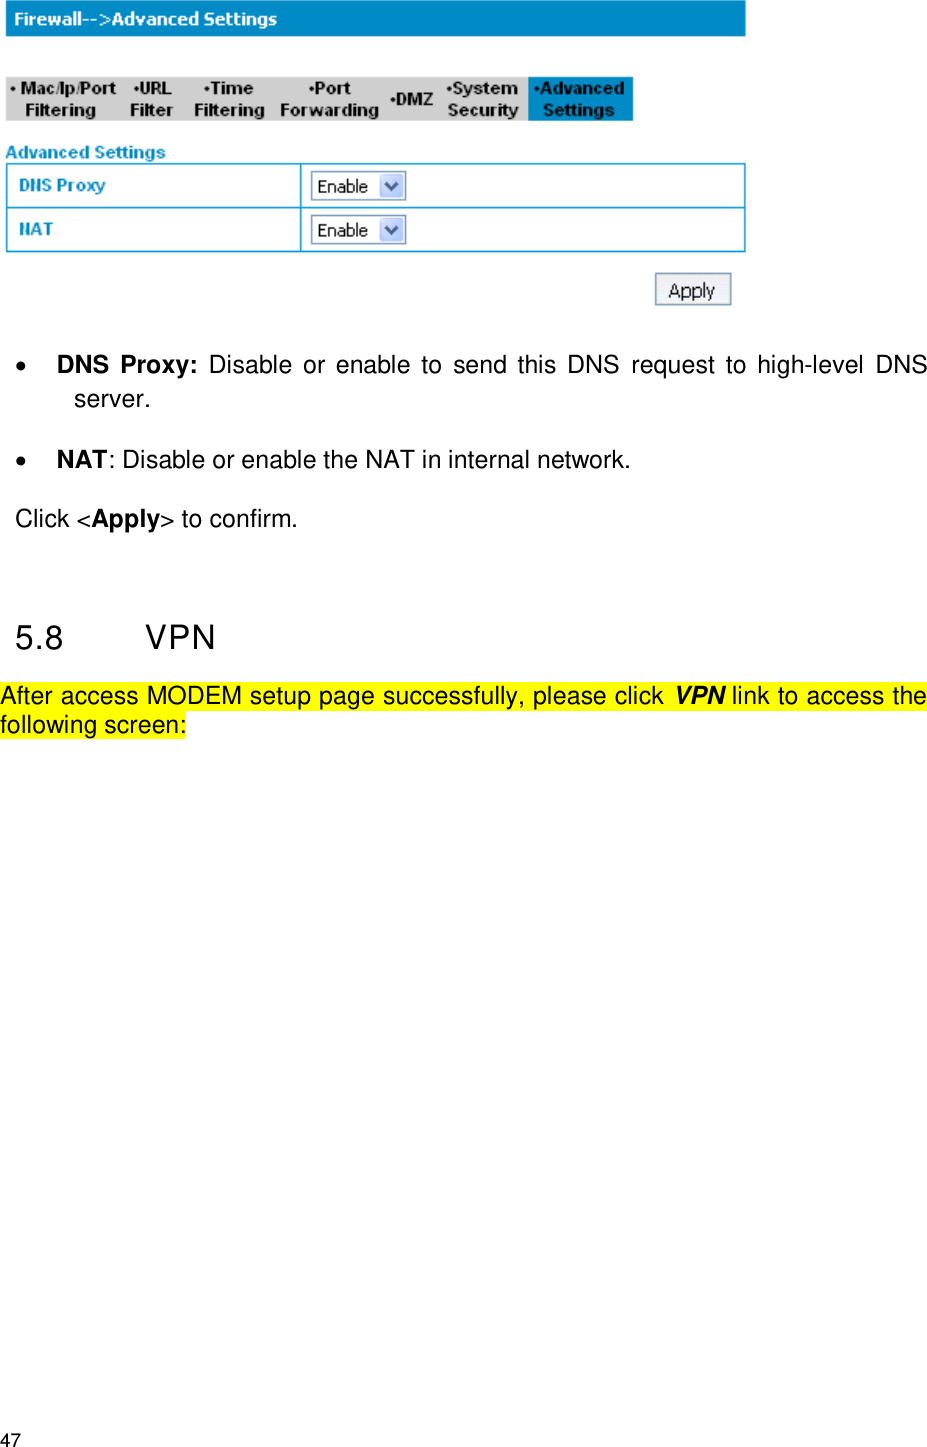 47   DNS Proxy: Disable  or  enable to  send  this  DNS  request  to high-level  DNS server.  NAT: Disable or enable the NAT in internal network. Click &lt;Apply&gt; to confirm.  5.8  VPN After access MODEM setup page successfully, please click VPN link to access the following screen: 